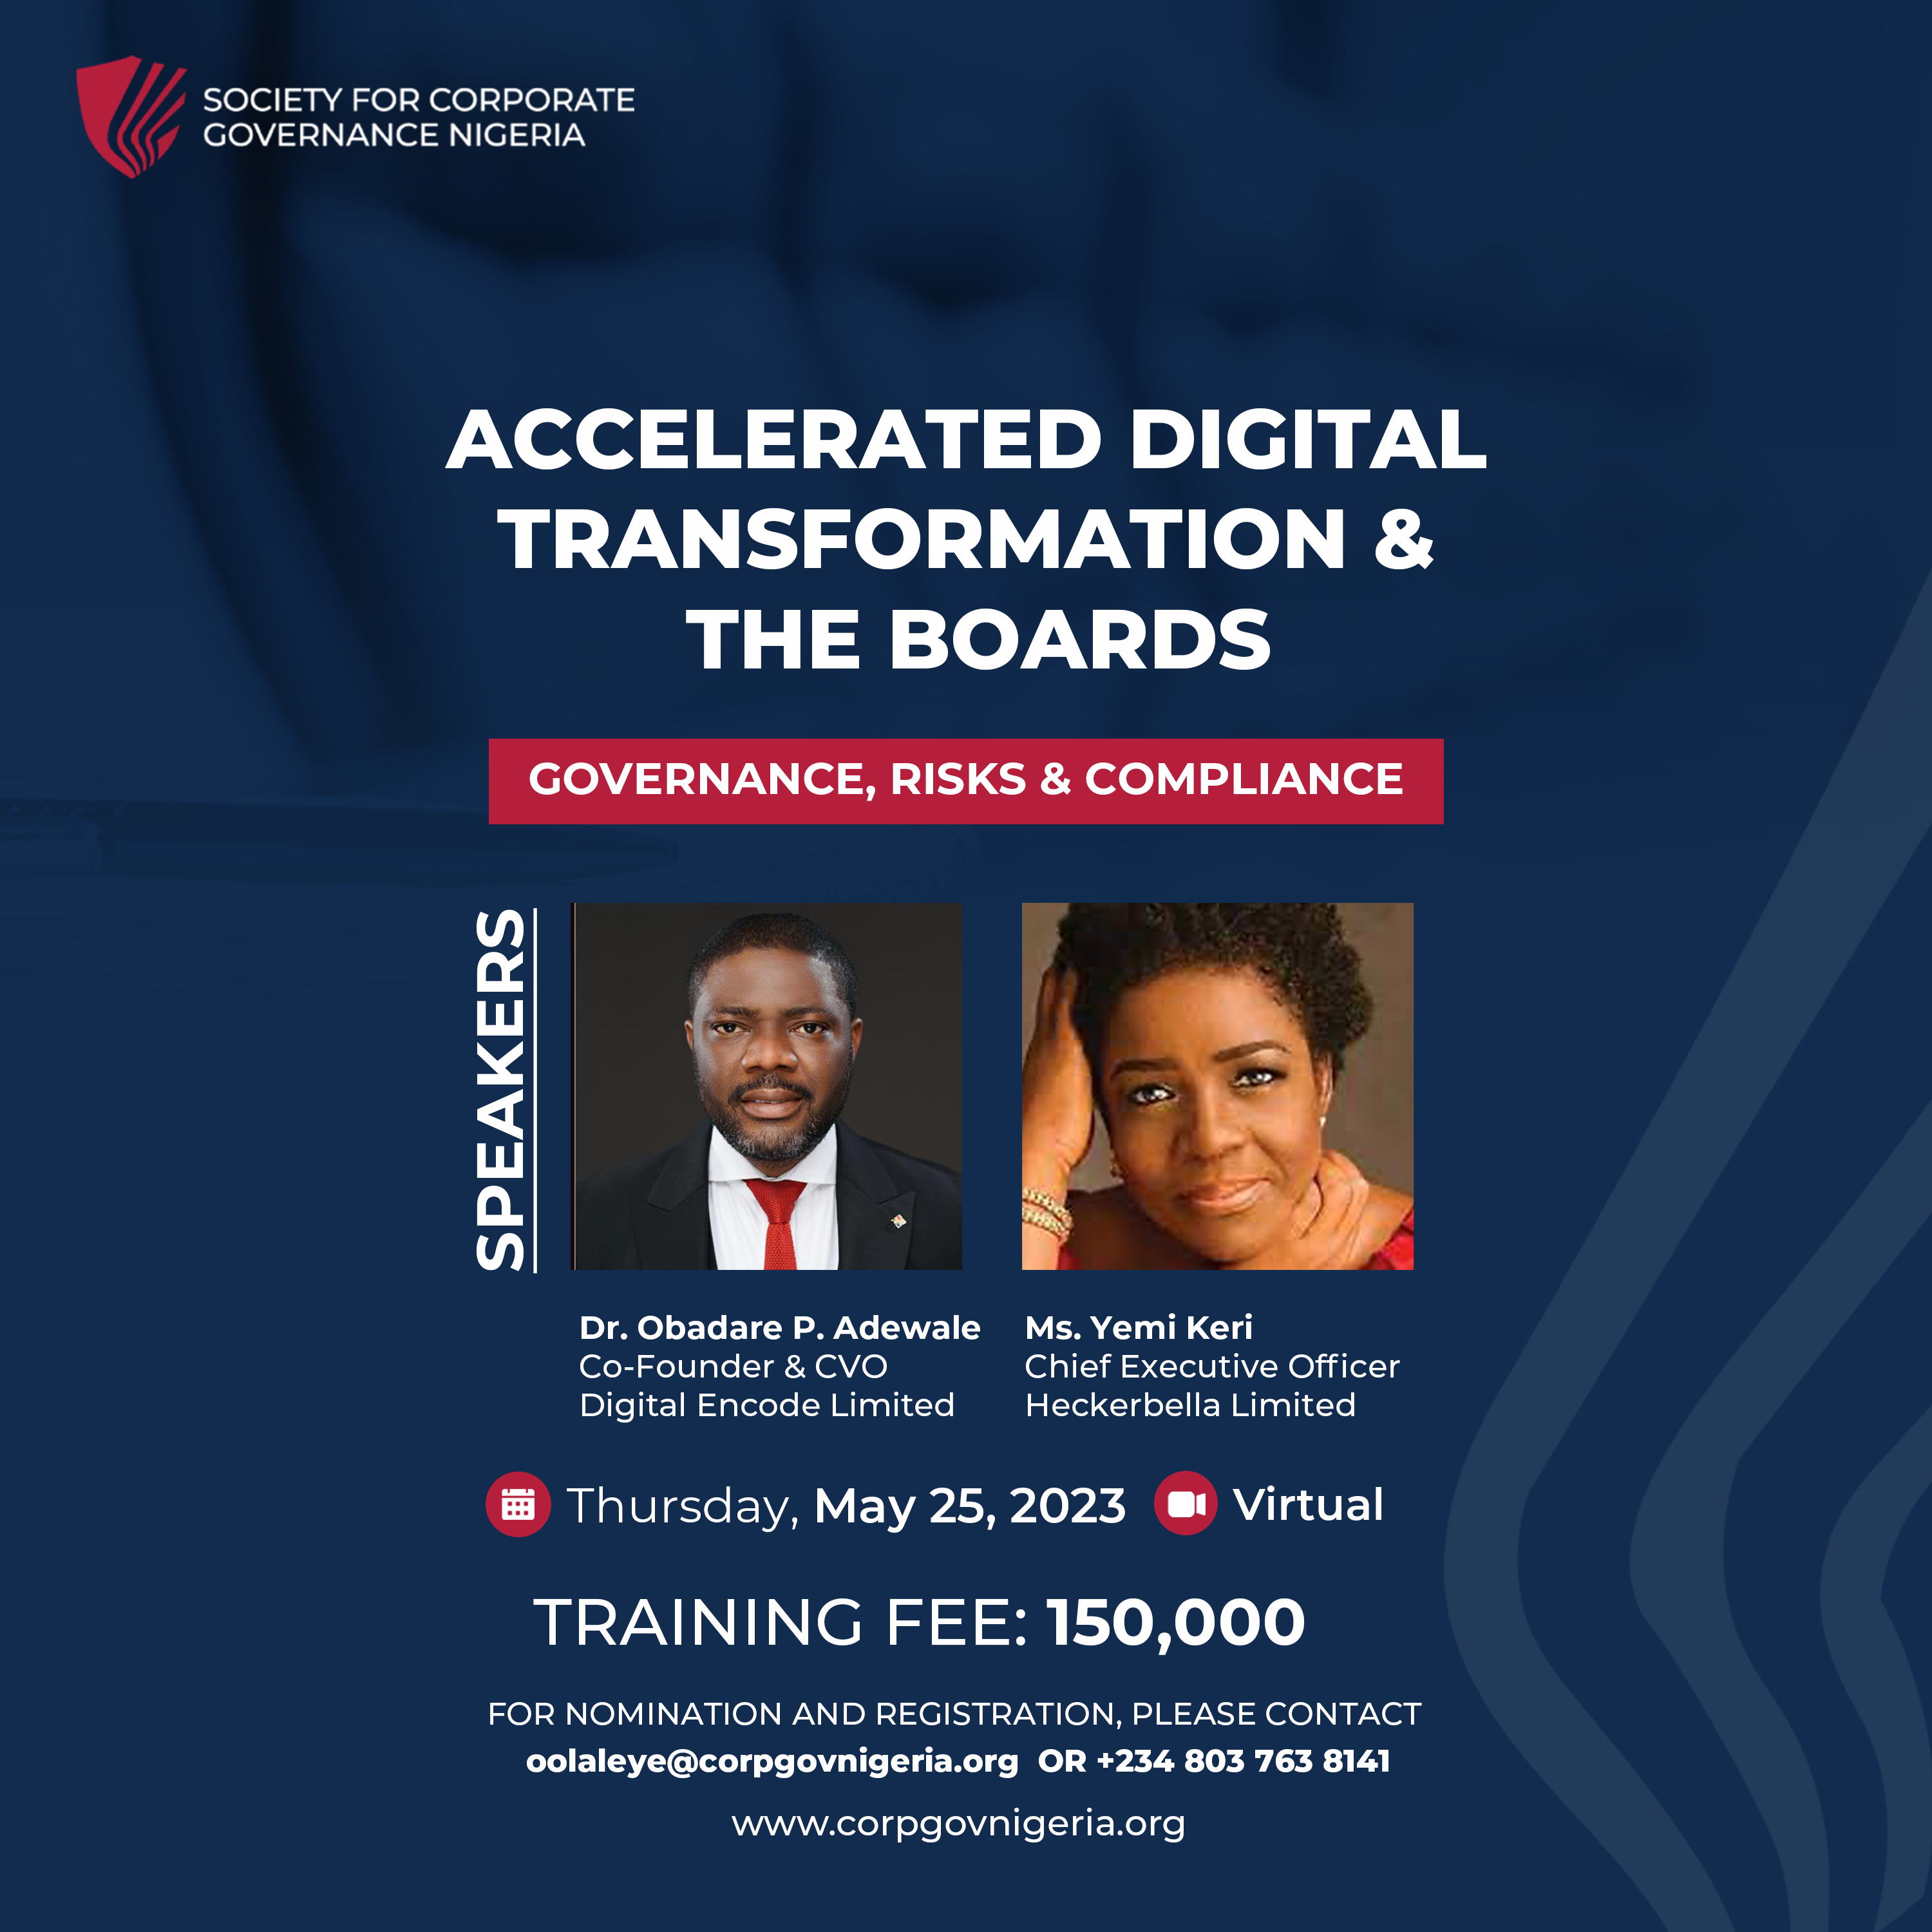 ACCELERATED DIGITAL TRANSFORMATION AND THE BOARD: GOVERNANCE, RISKS, AND COMPLIANCE